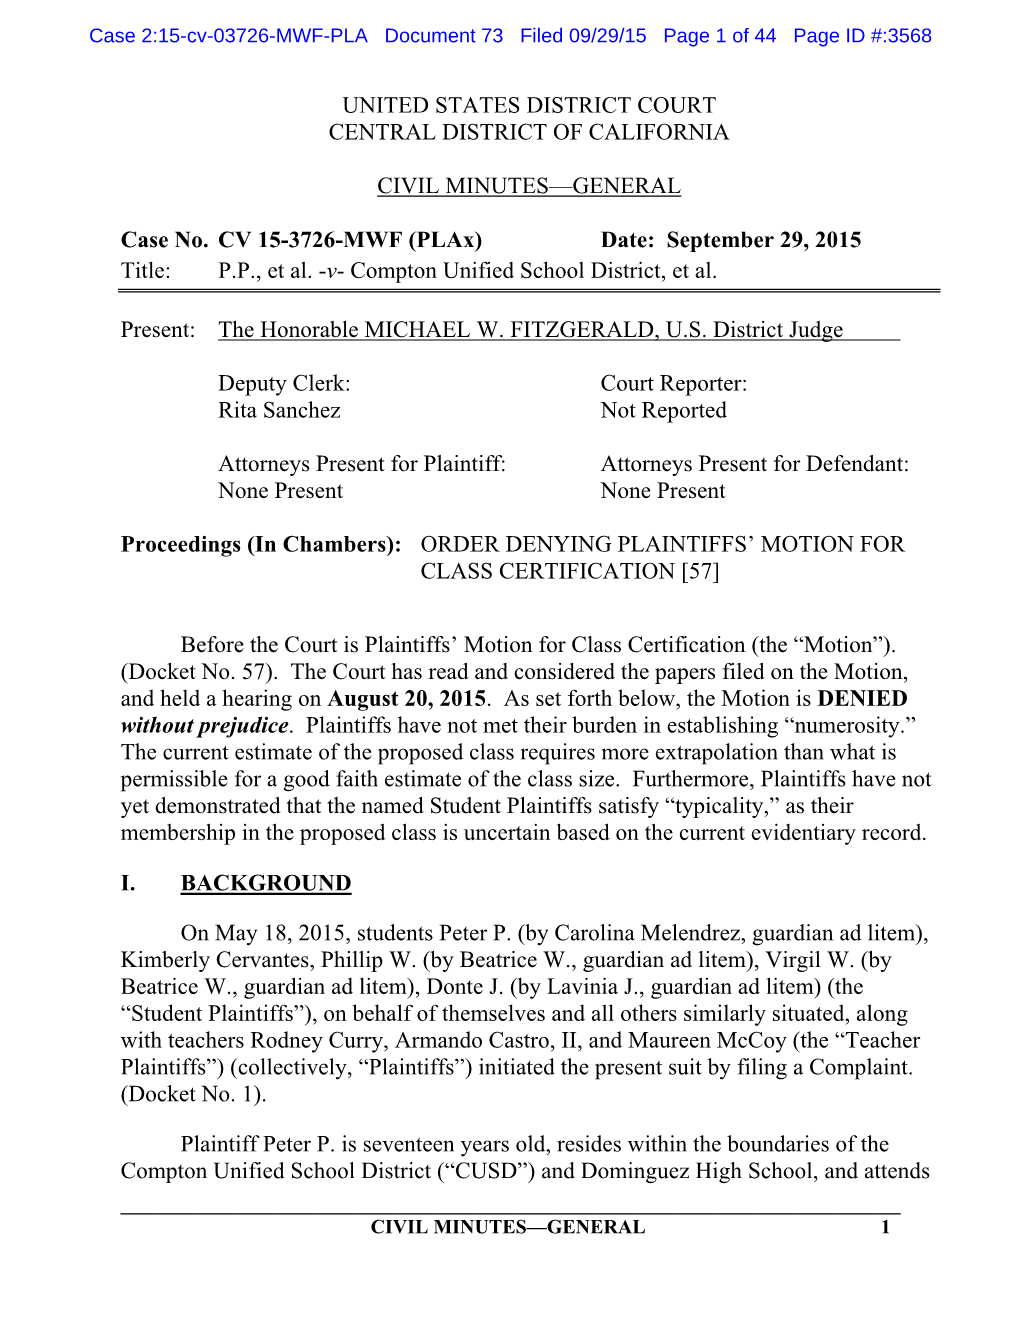 UNITED STATES DISTRICT COURT CENTRAL DISTRICT of CALIFORNIA CIVIL MINUTES—GENERAL Case No. CV 15-3726-MWF